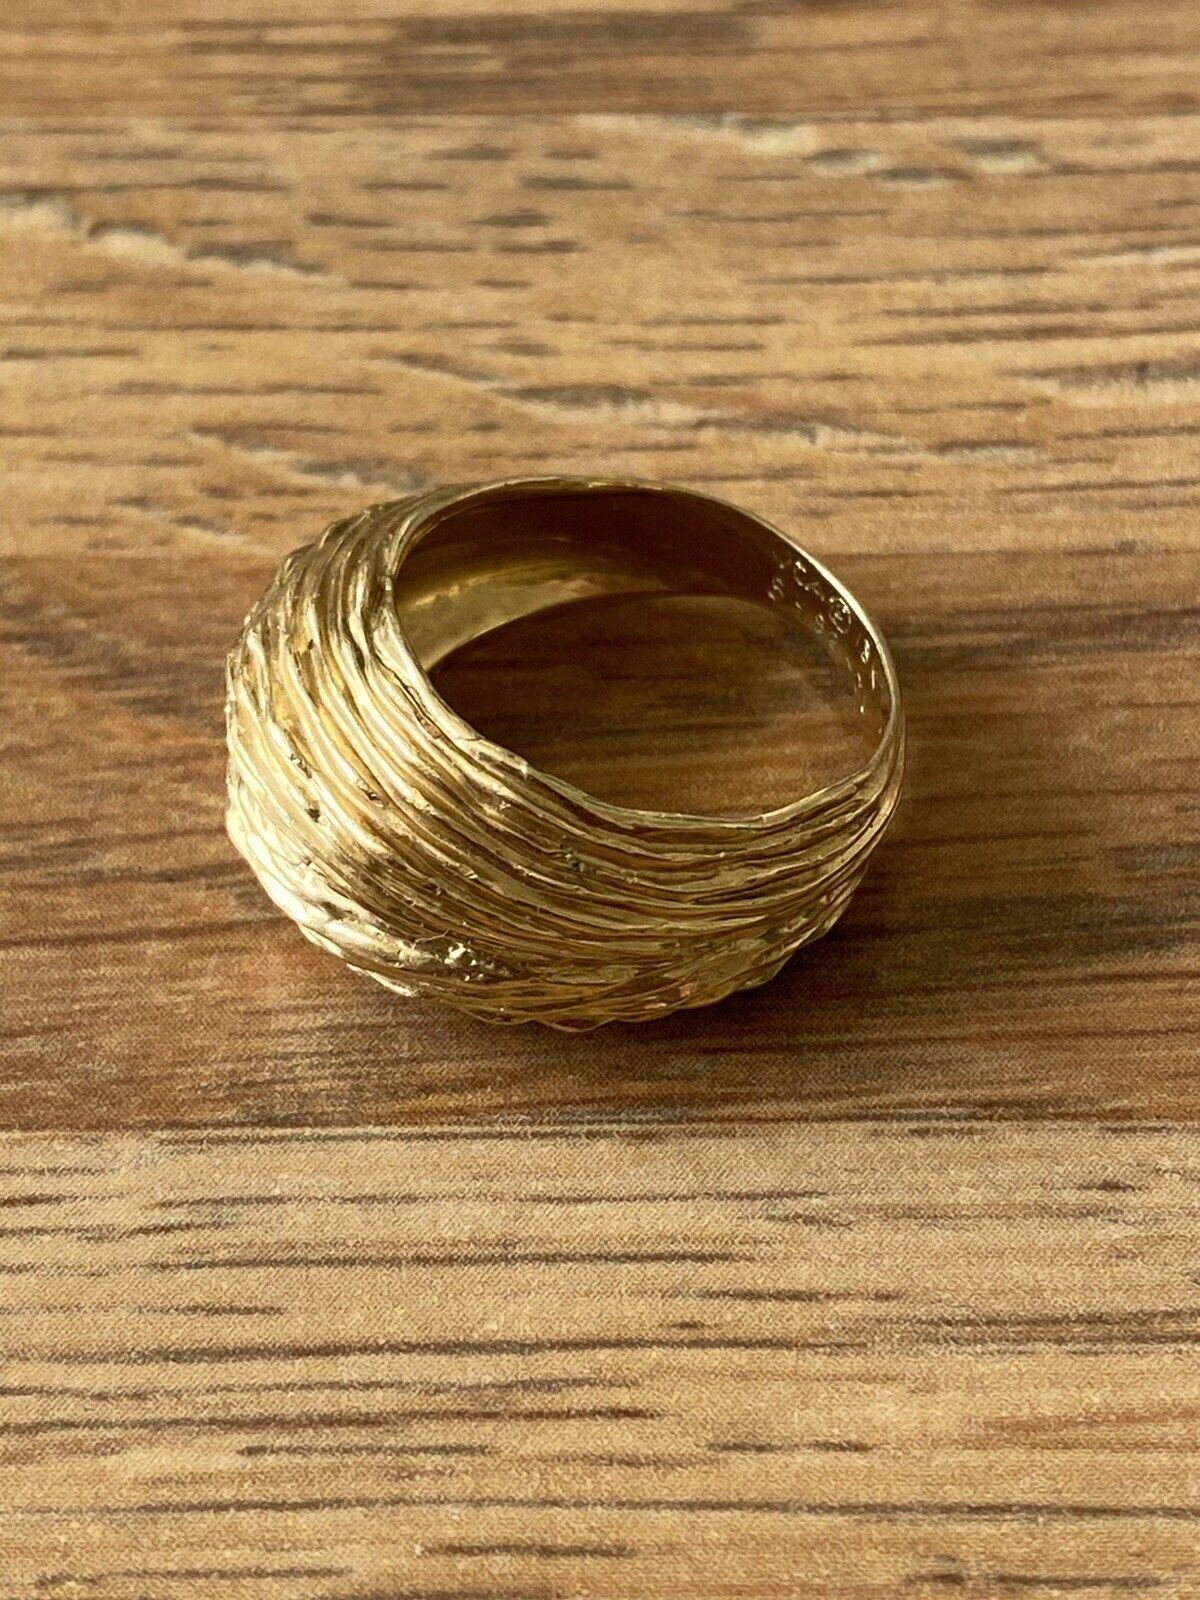 Van Cleef & Arpels NY 18k Yellow Gold Bombe Ring Vintage Circa 1970s

Here is your chance to purchase a beautiful and highly collectible designer cocktail ring.  

Up for sale is a very nice vintage 1970s Van Cleef & Arpels 18k solid yellow gold